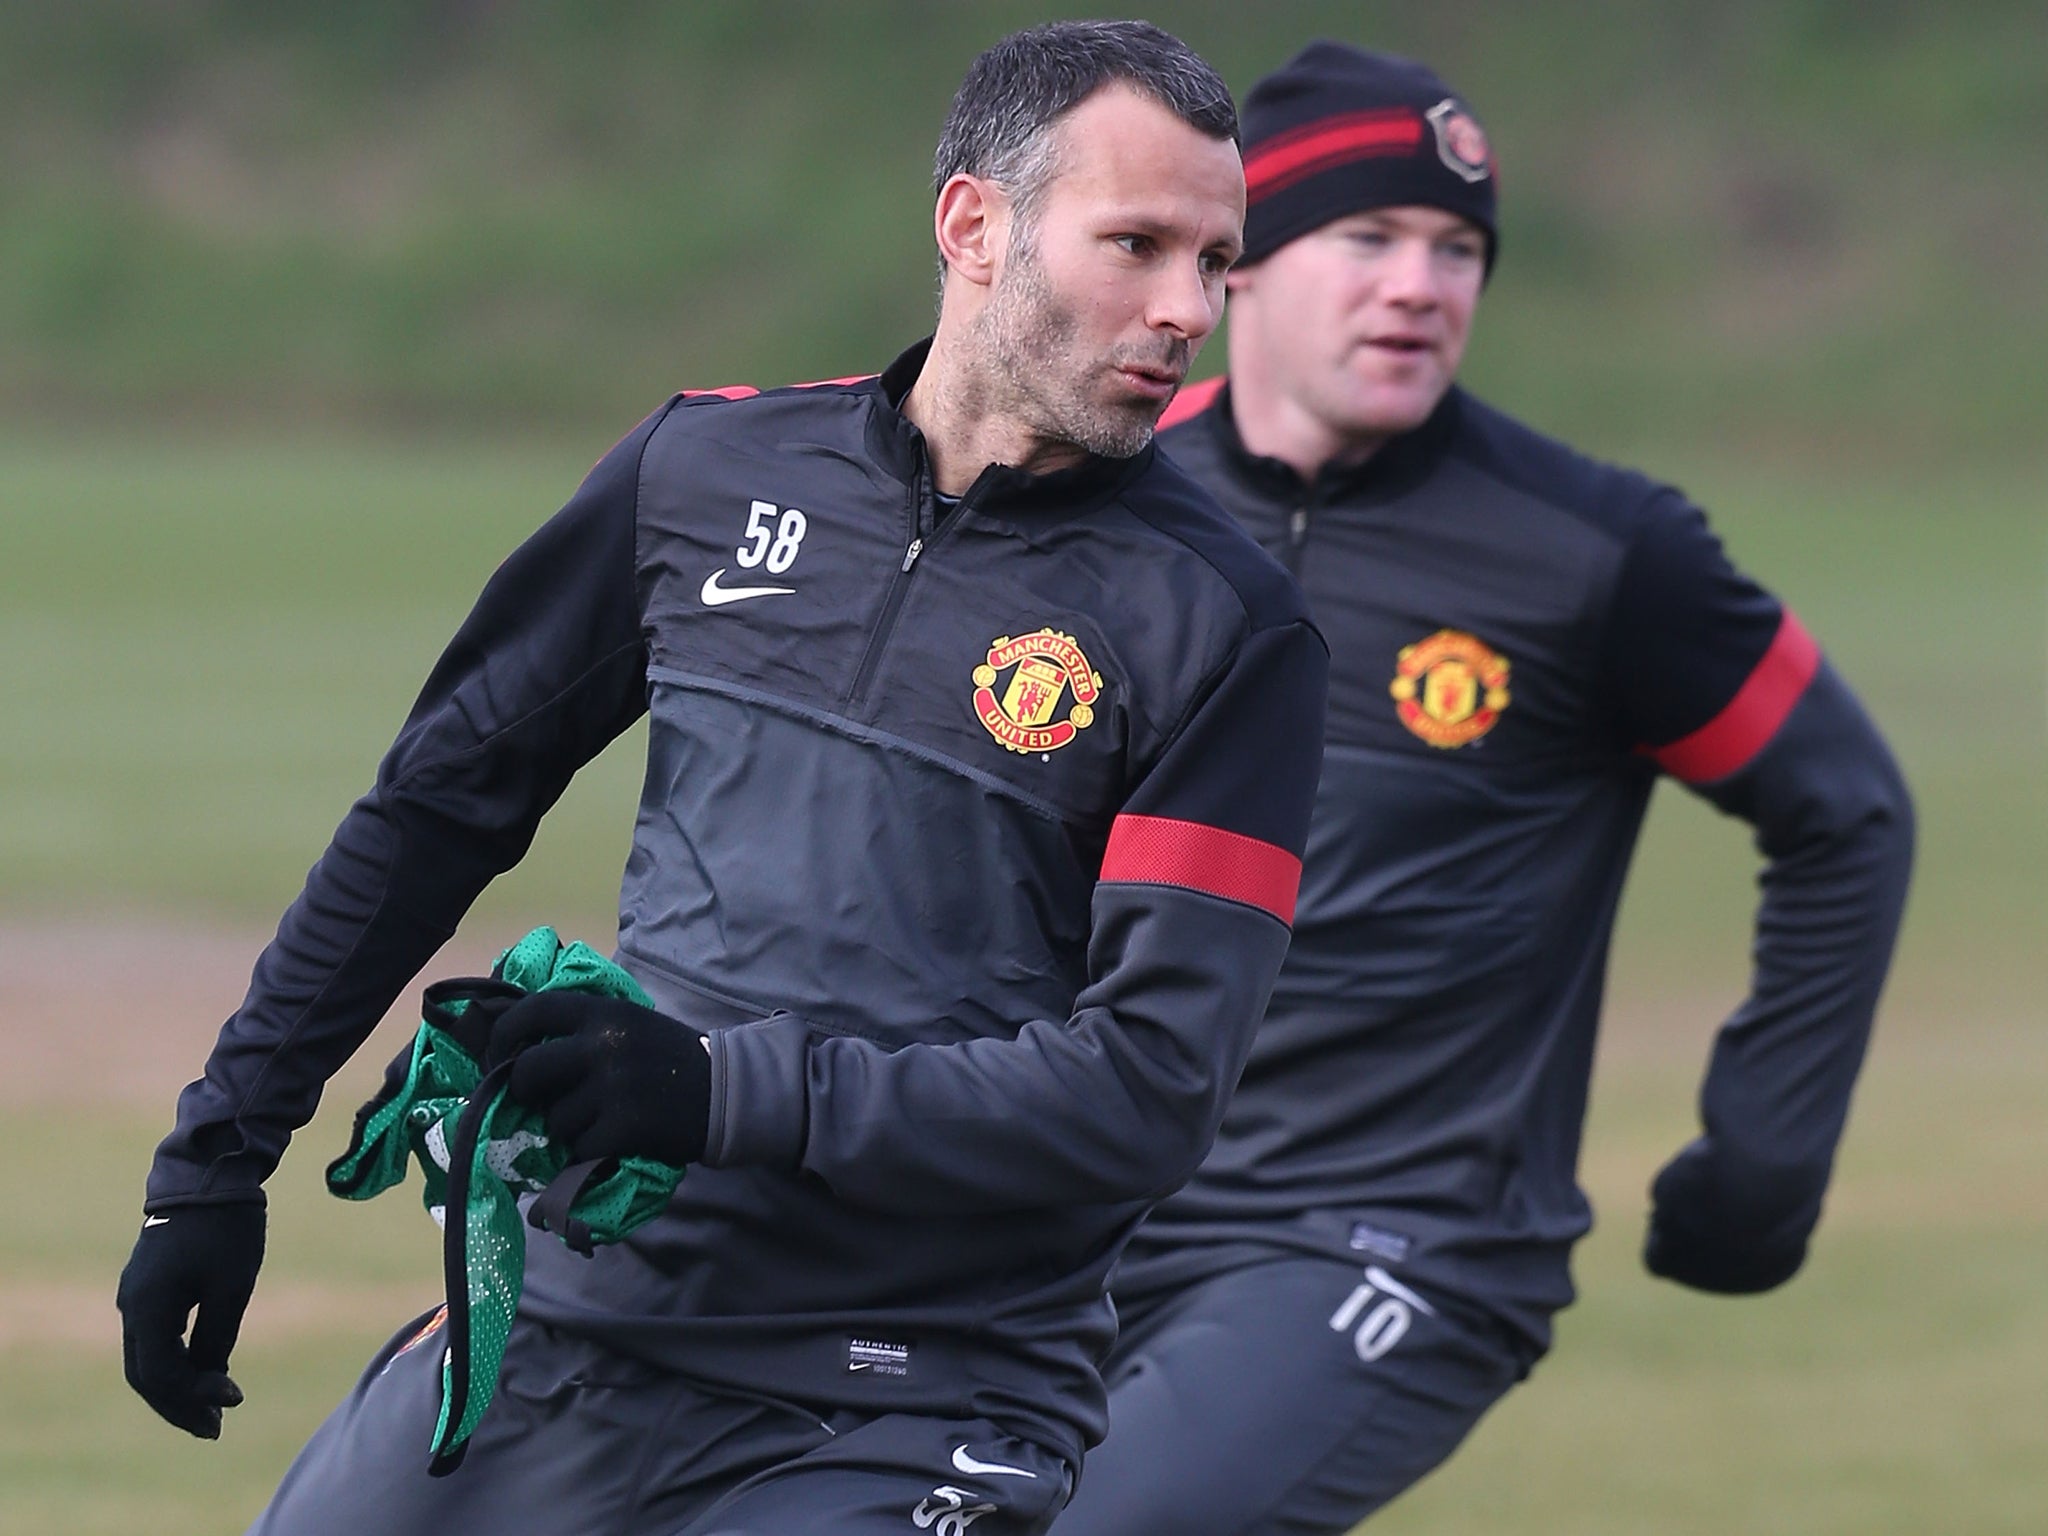 Manchester United hope Ryan Giggs' appointment as player-coach will persuade Wayne Rooney to stay at club